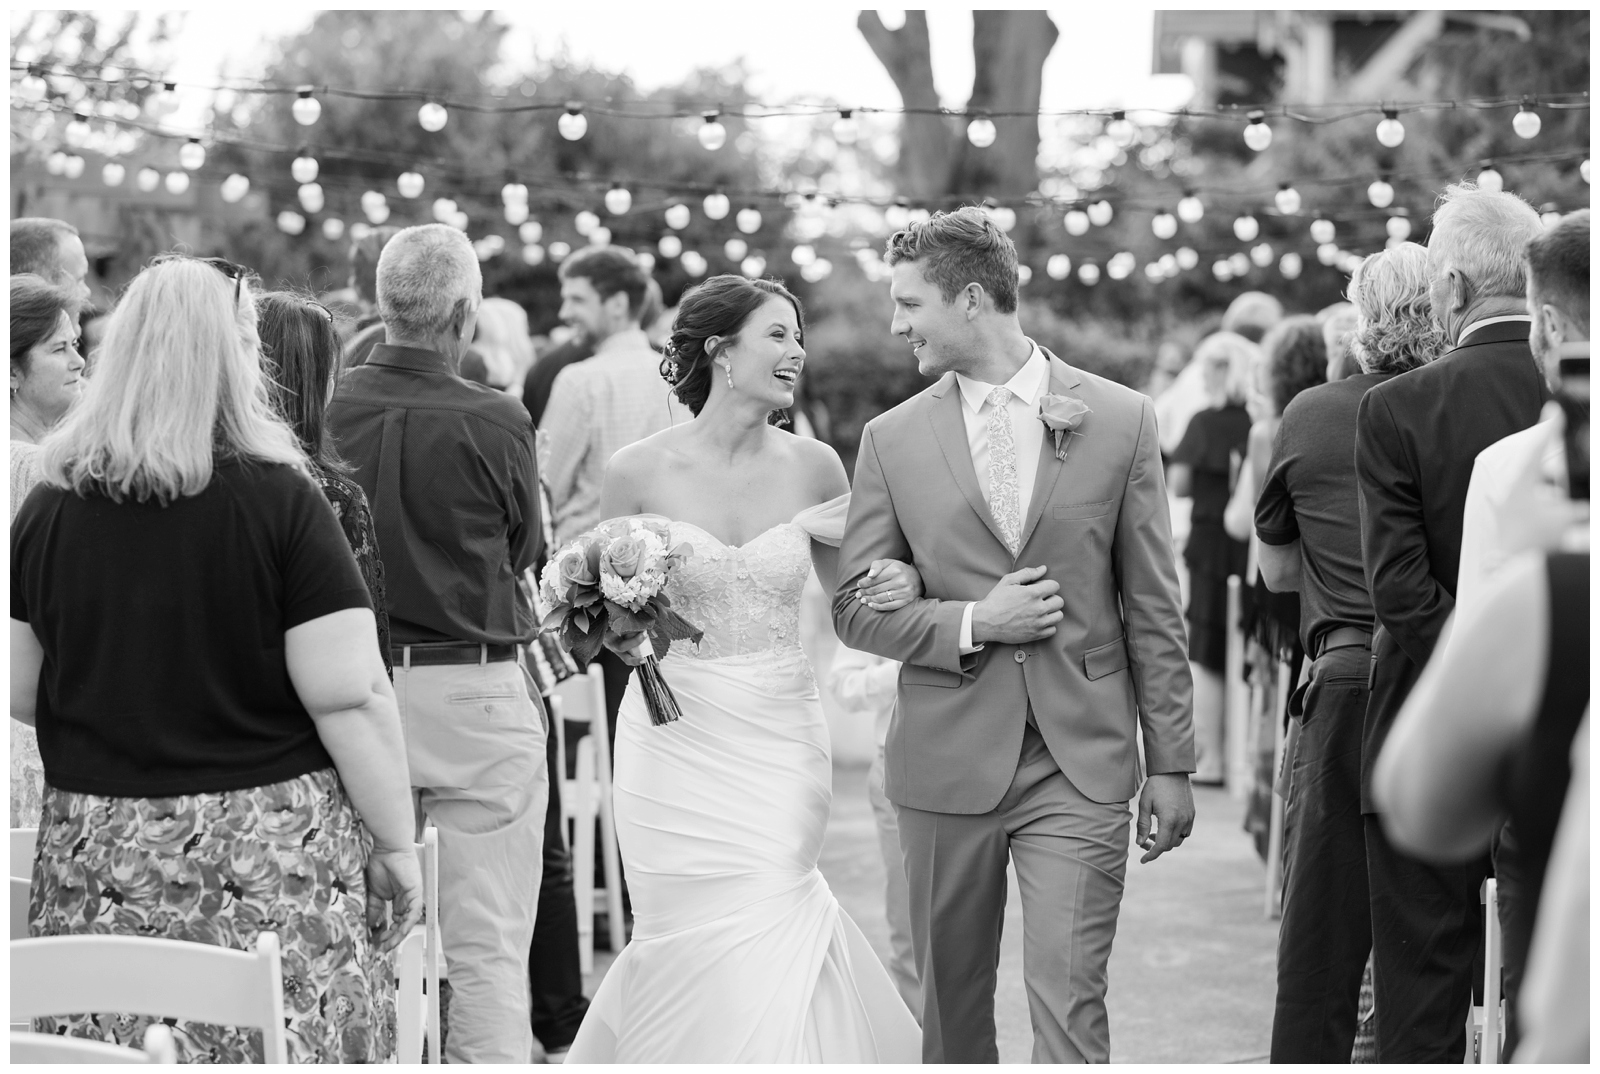 The wells barn wedding at franklin park conservatory 